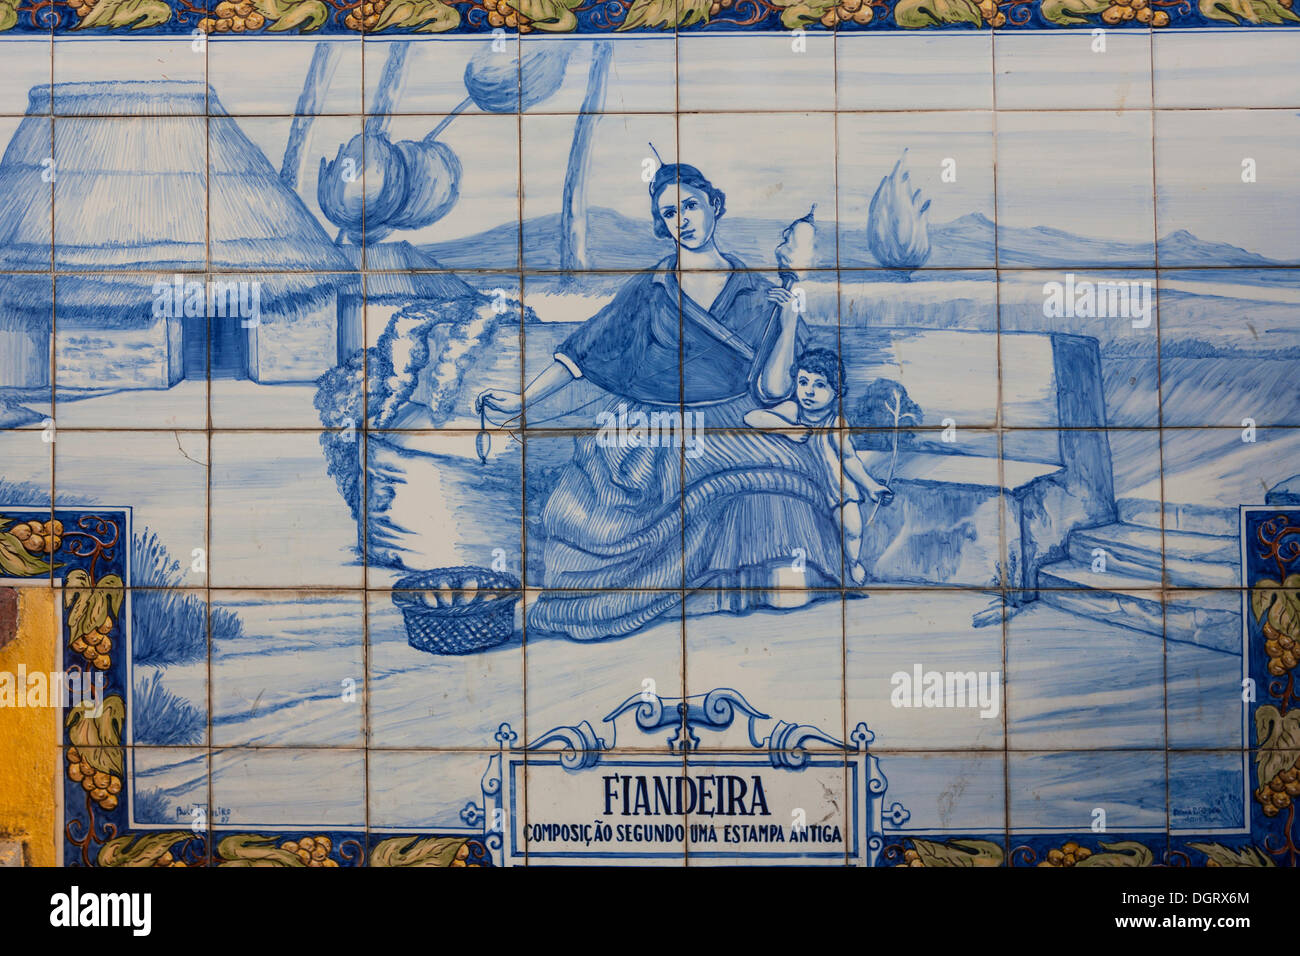 Azulejo, mural made of ceramic tiles, woman holding a spindle, in Funchal, Santa Luzia, Funchal, Madeira, Portugal Stock Photo